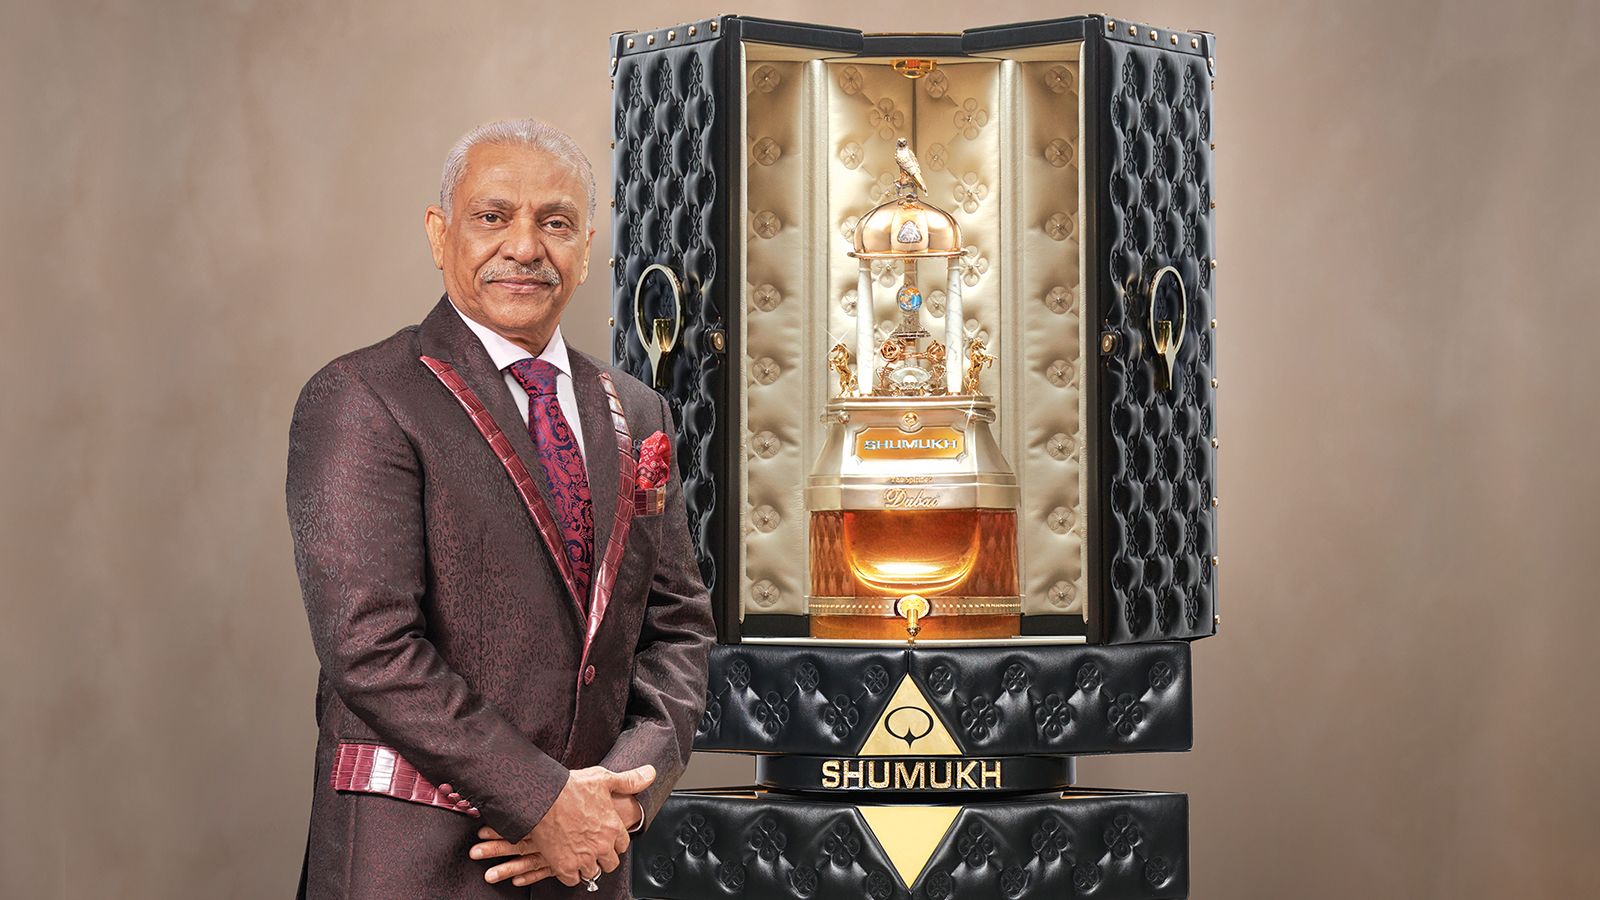 World's most expensive perfume set for exclusive show